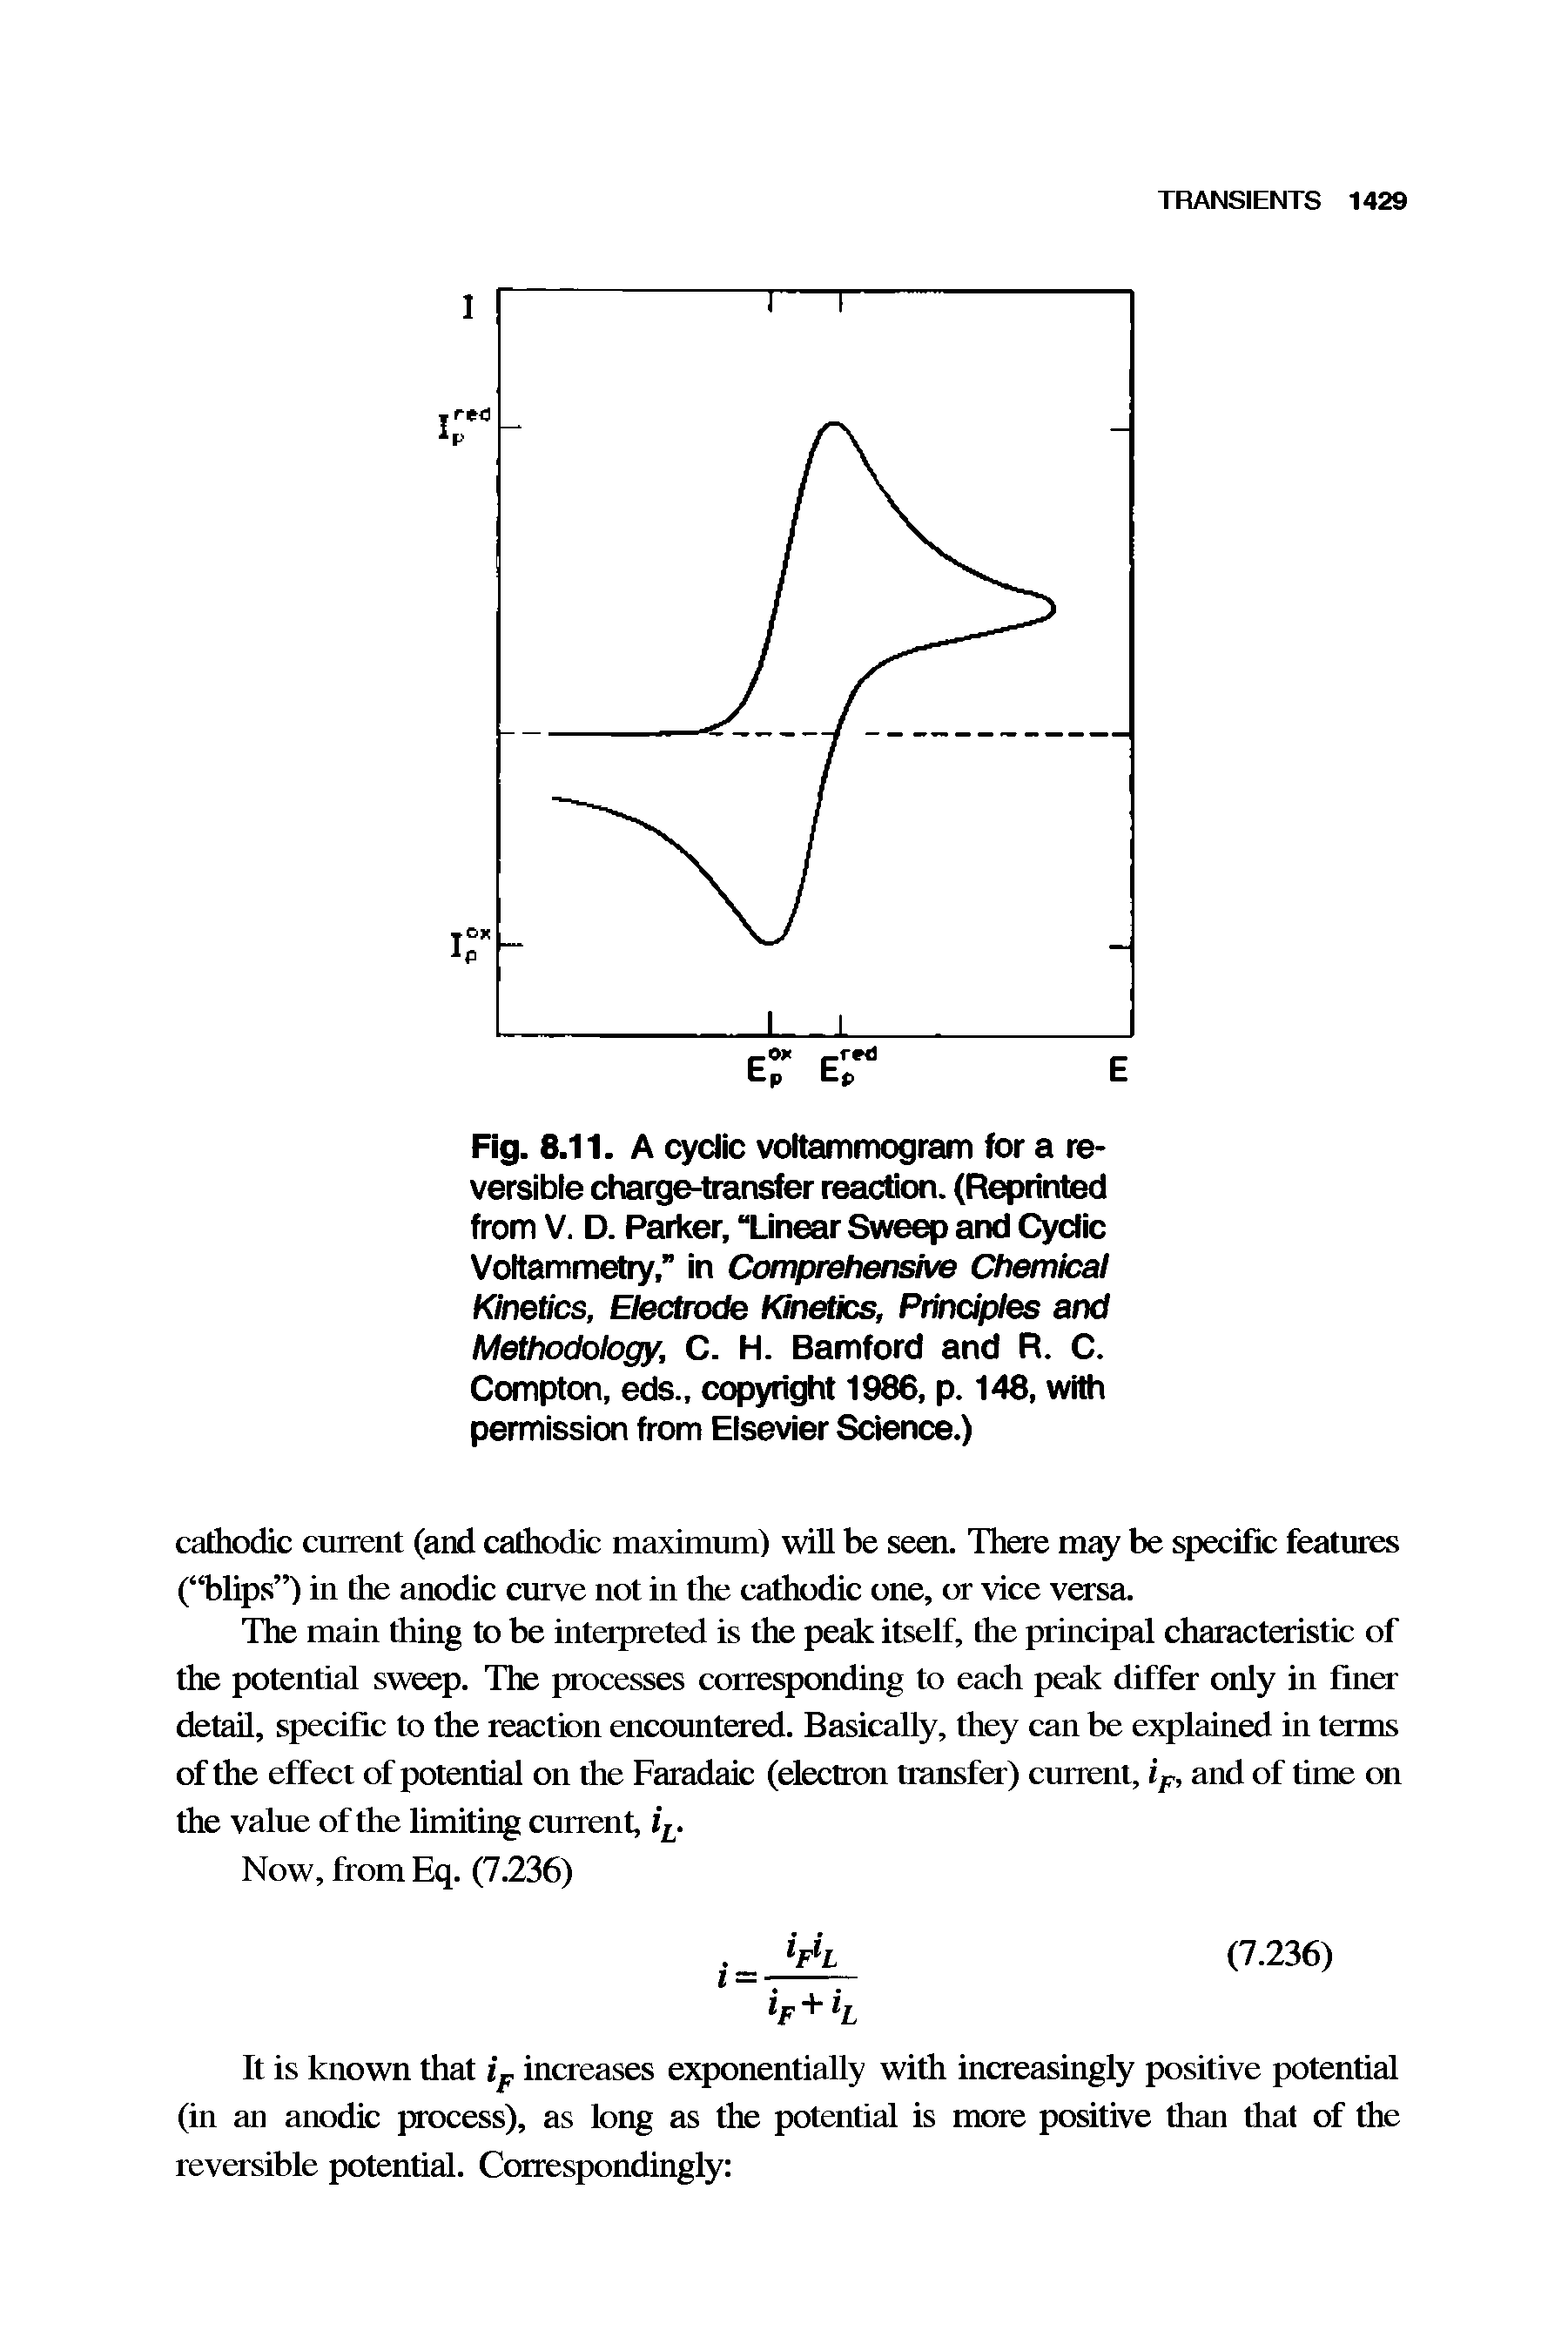 Fig. 8.11. A cyclic voltammogram for a reversible charge-transfer reaction. (Reprinted from V. D. Parker, Linear Sweep and Cyclic Voltammetry, in Comprehensive Chemical Kinetics, Electrode Kinetics, Principles and Methodology, C. H. Bamford and R. C. Compton, eds., copyright 1986, p. 148, with permission from Elsevier Science.)...